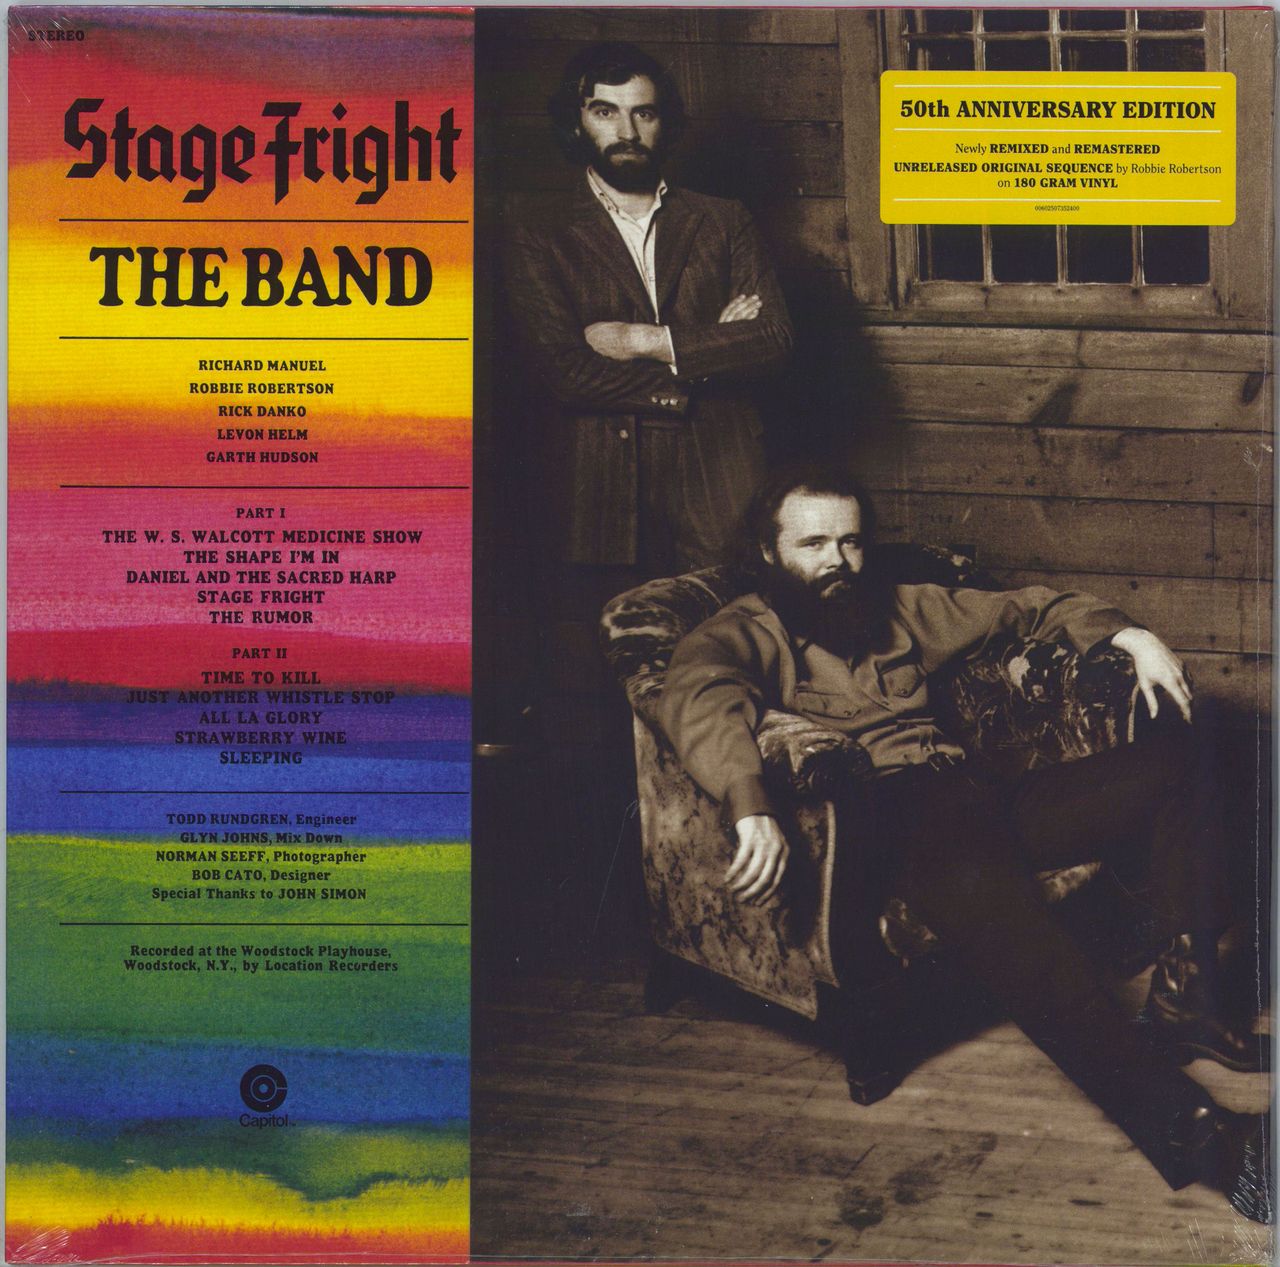 The Band Stage Fright: Remastered & Resequenced - 180gm Vinyl - Sealed UK vinyl LP album (LP record) 00602507352400